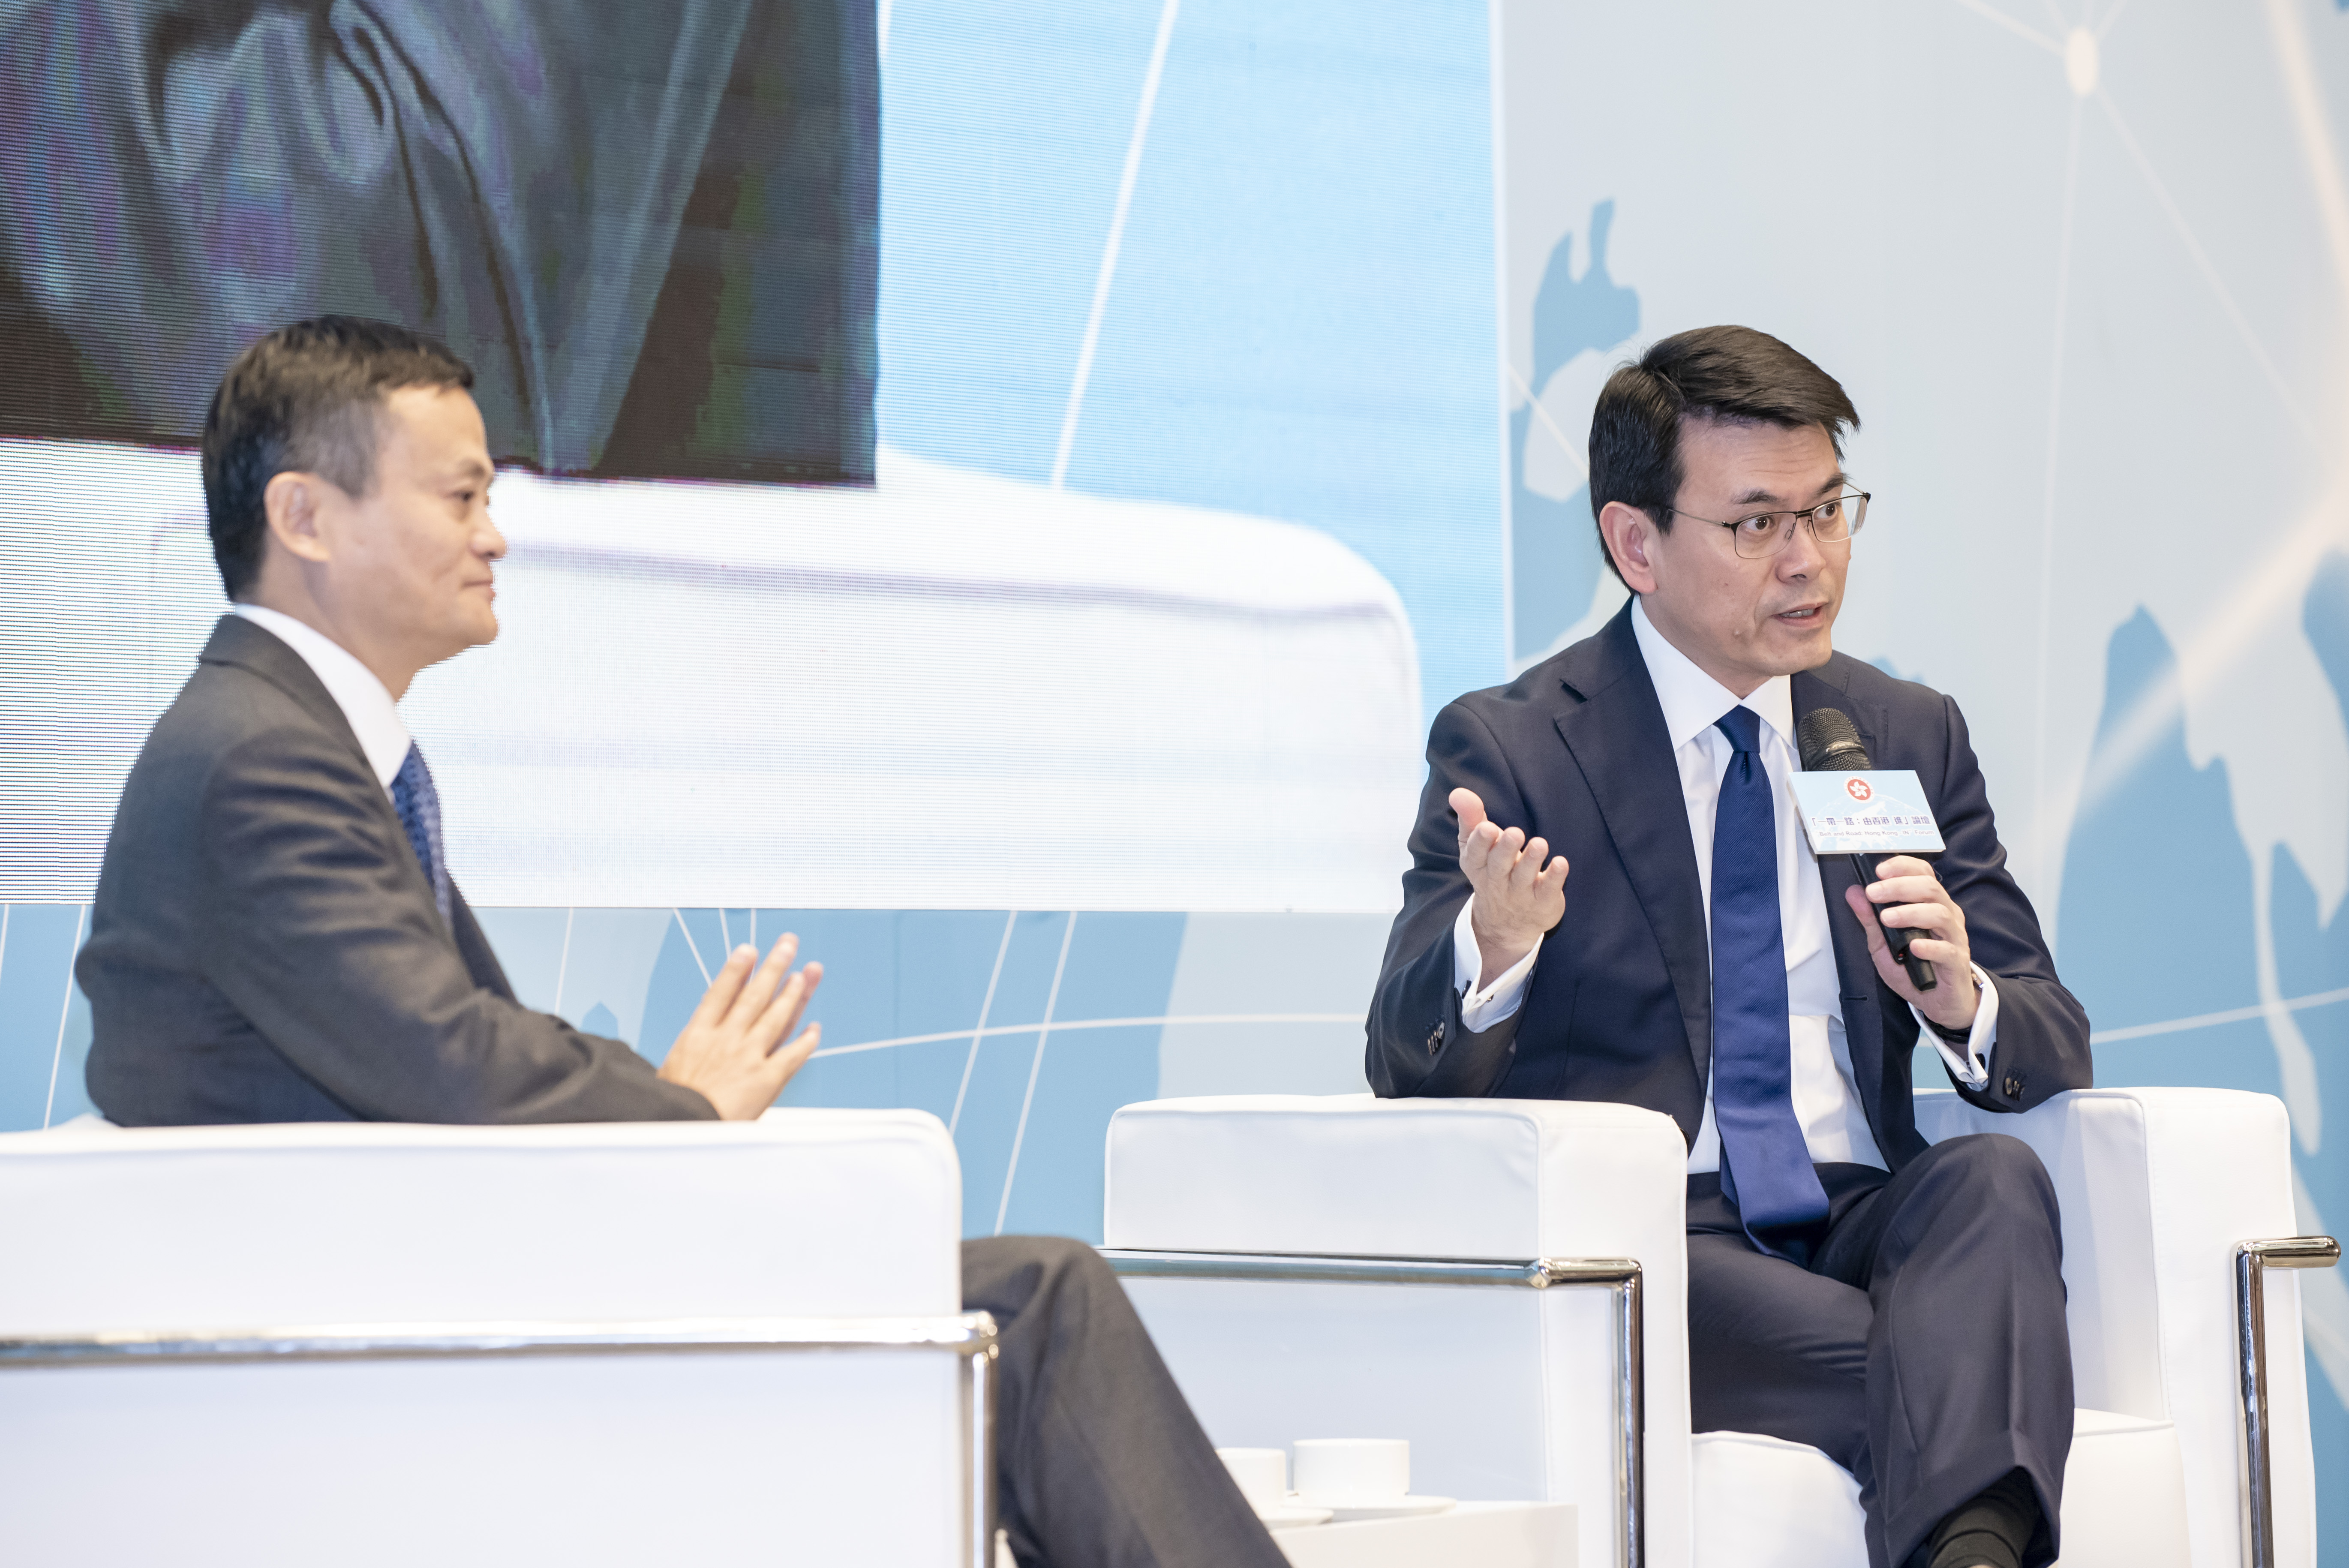 Mr Jack Ma, the Executive Chairman of the Alibaba Group, offered his insights at the sharing session of the Forum moderated by the Secretary for Commerce and Economic Development, Mr Edward Yau.